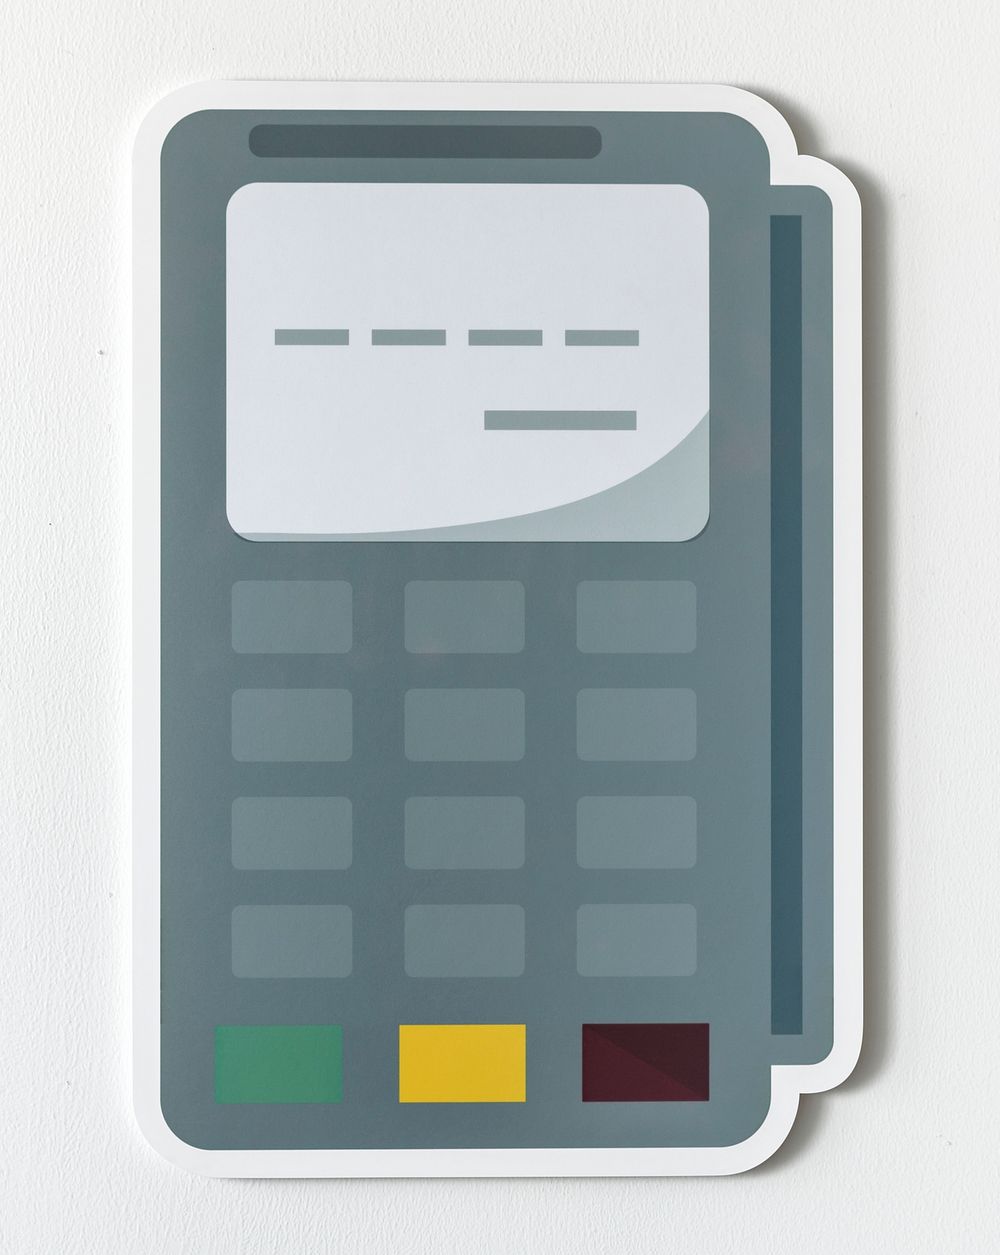 Credit card terminal cut out icon